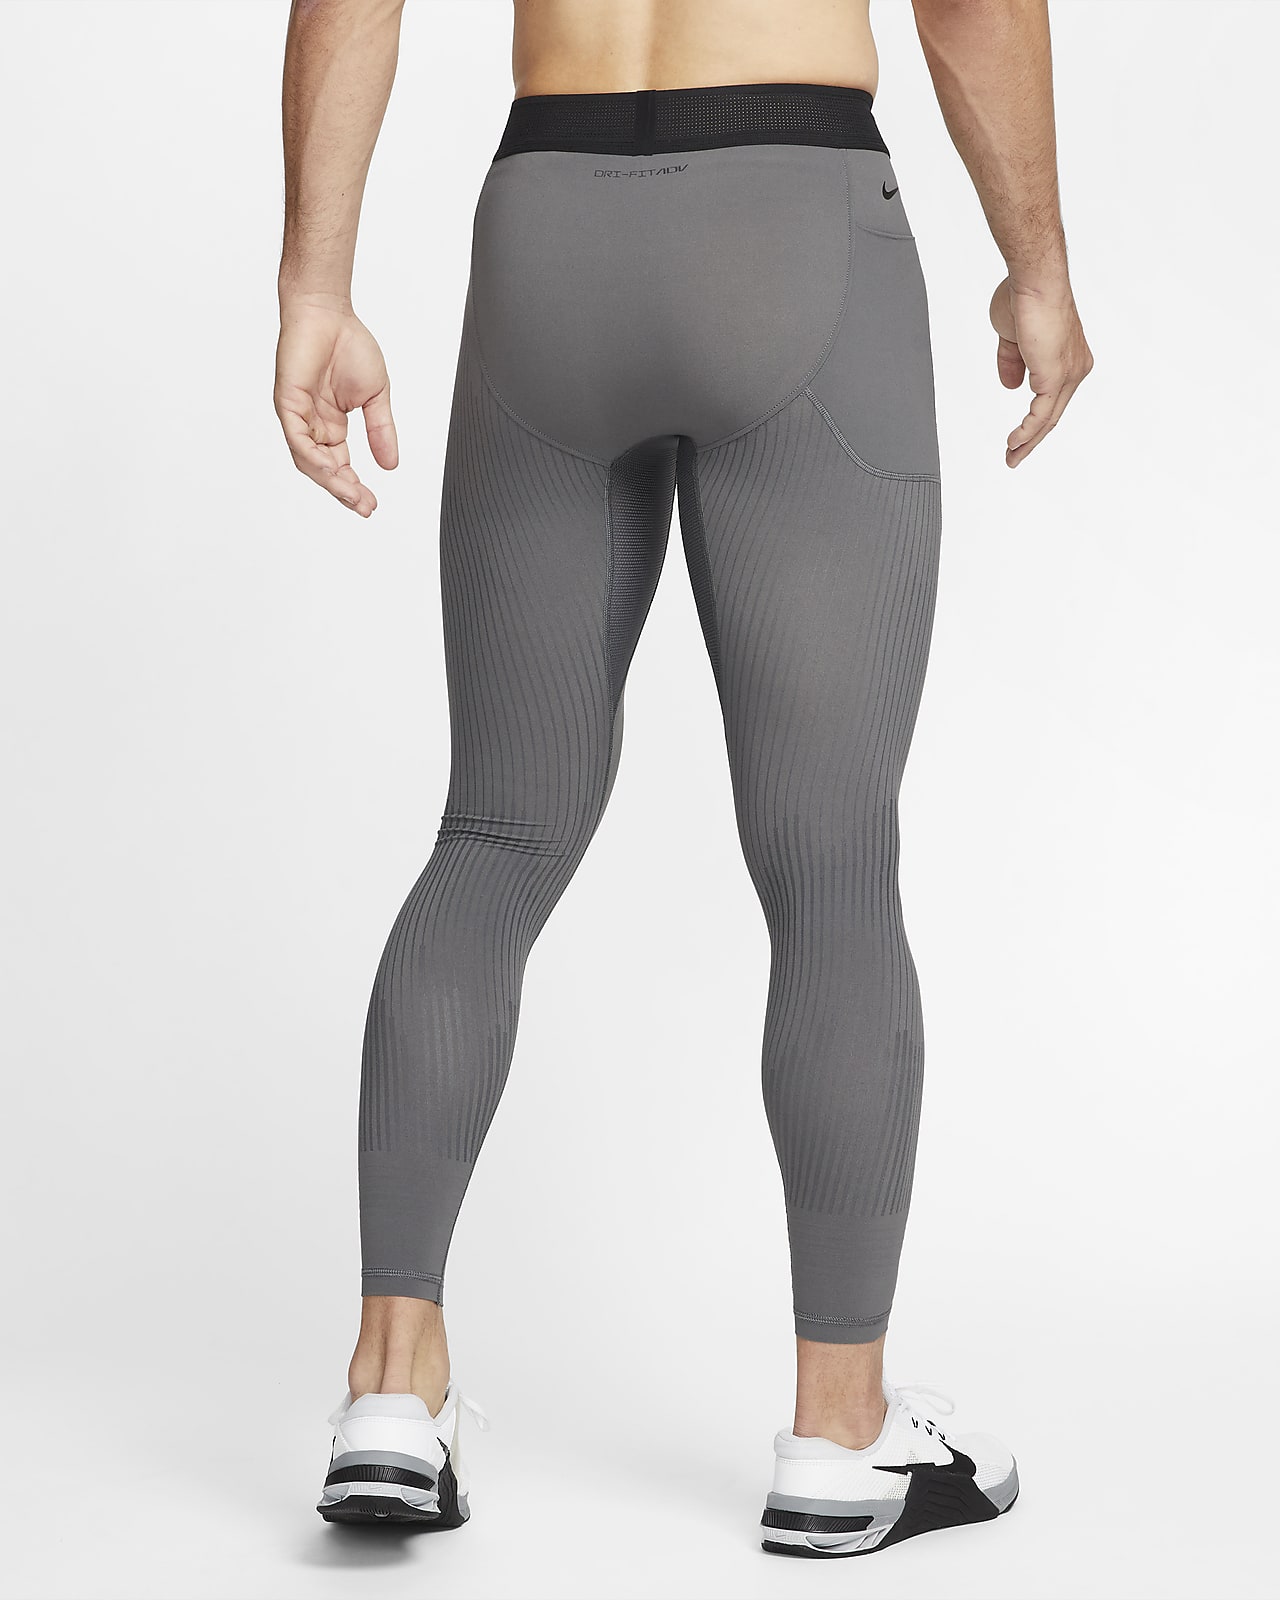 Stay cool and locked in with Nike Pro Intertwist Dri-fit Tights